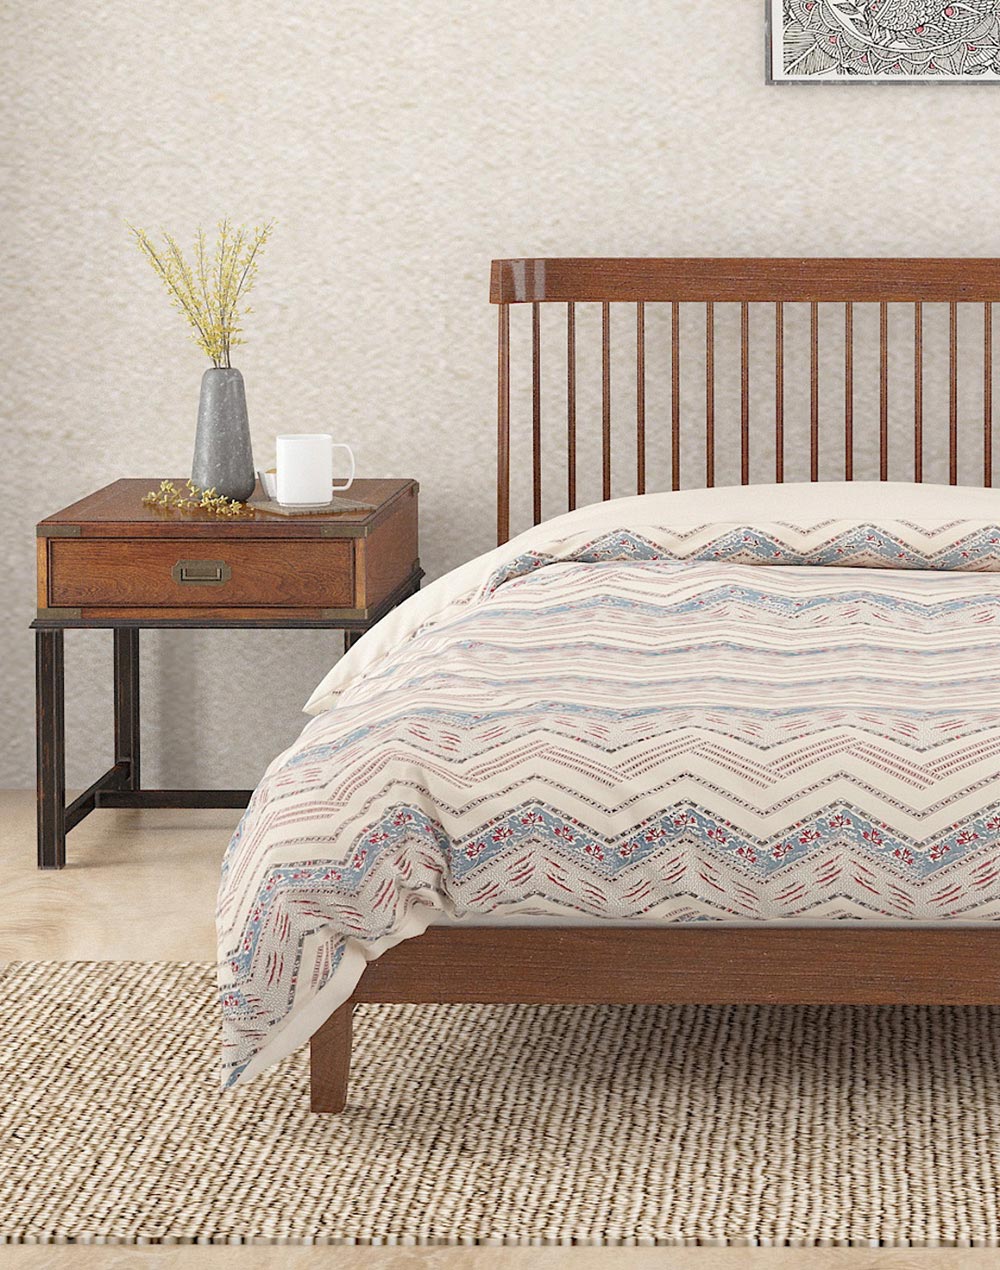 Multi Inaya Cotton Printed Duvet Cover Double